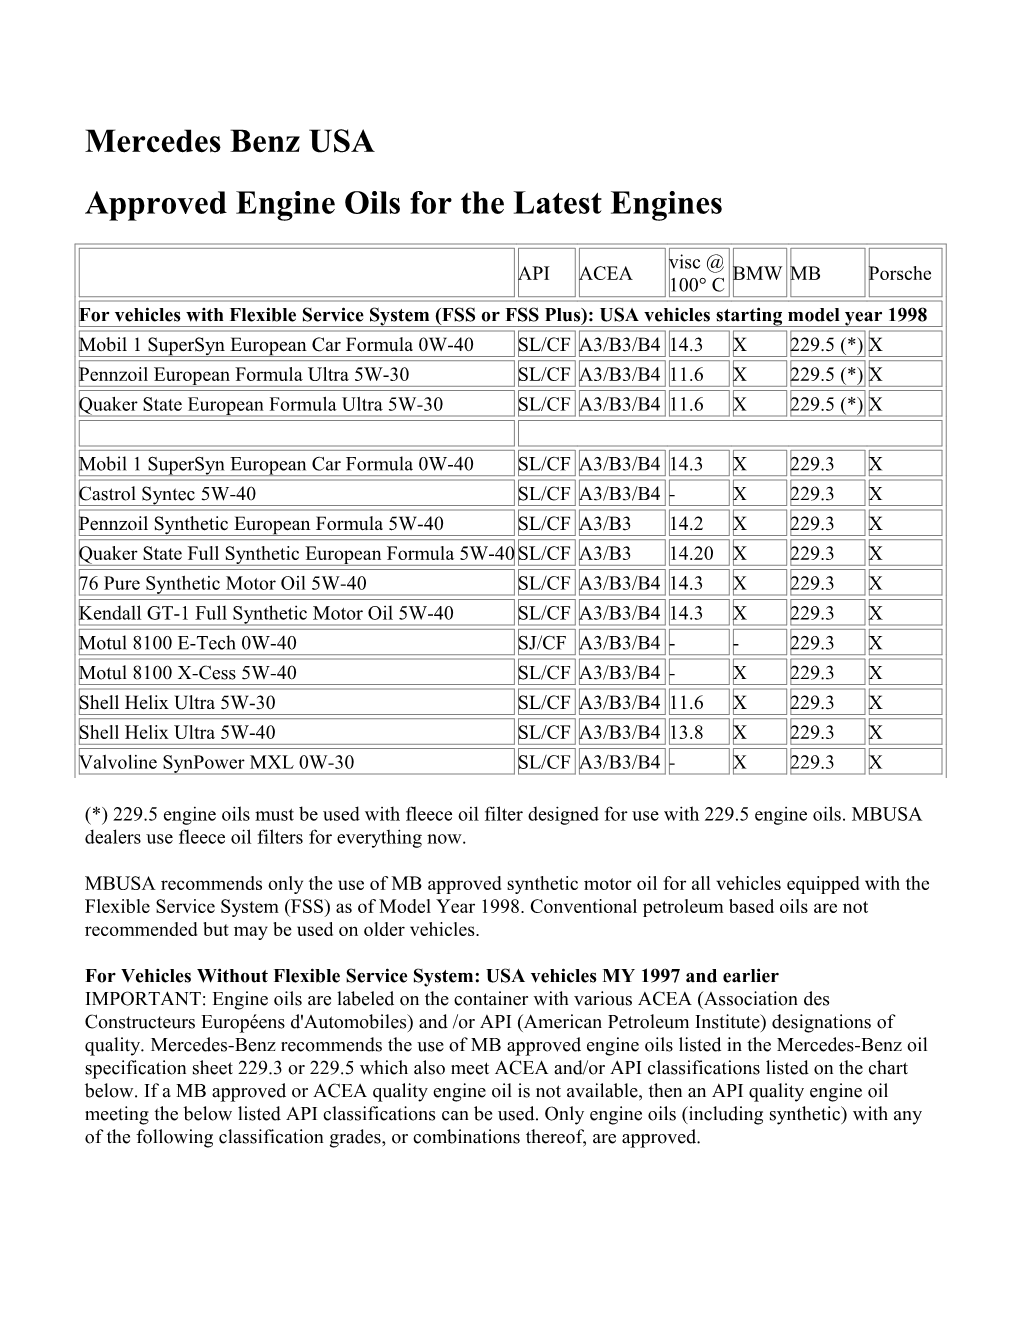 USA: Approved Engine Oils for the Latest Engines